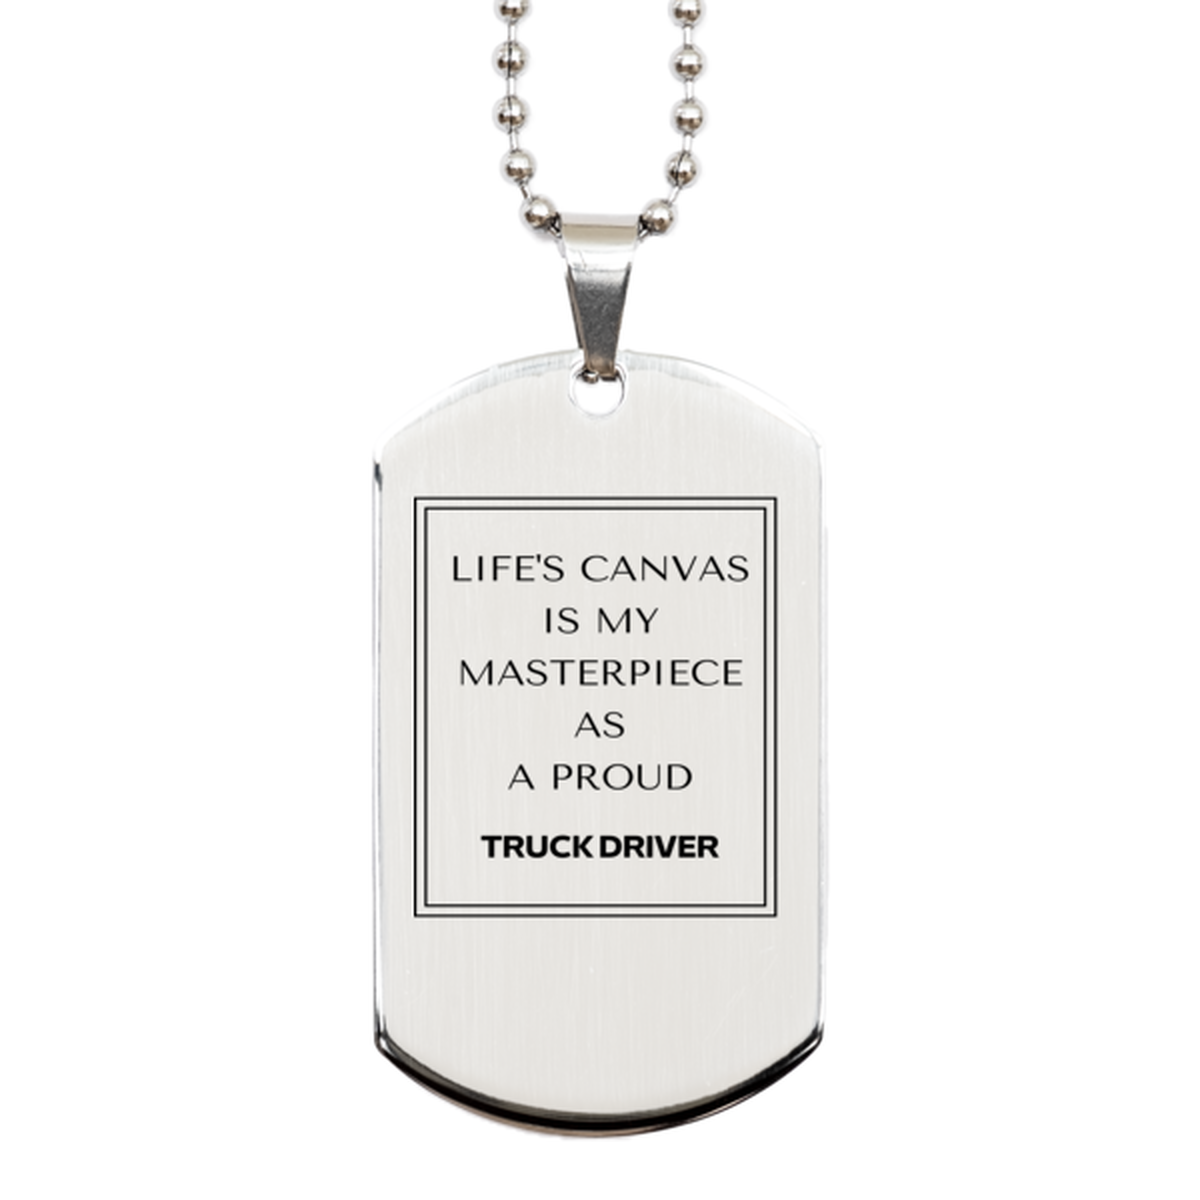 Proud Truck Driver Gifts, Life's canvas is my masterpiece, Epic Birthday Christmas Unique Silver Dog Tag For Truck Driver, Coworkers, Men, Women, Friends